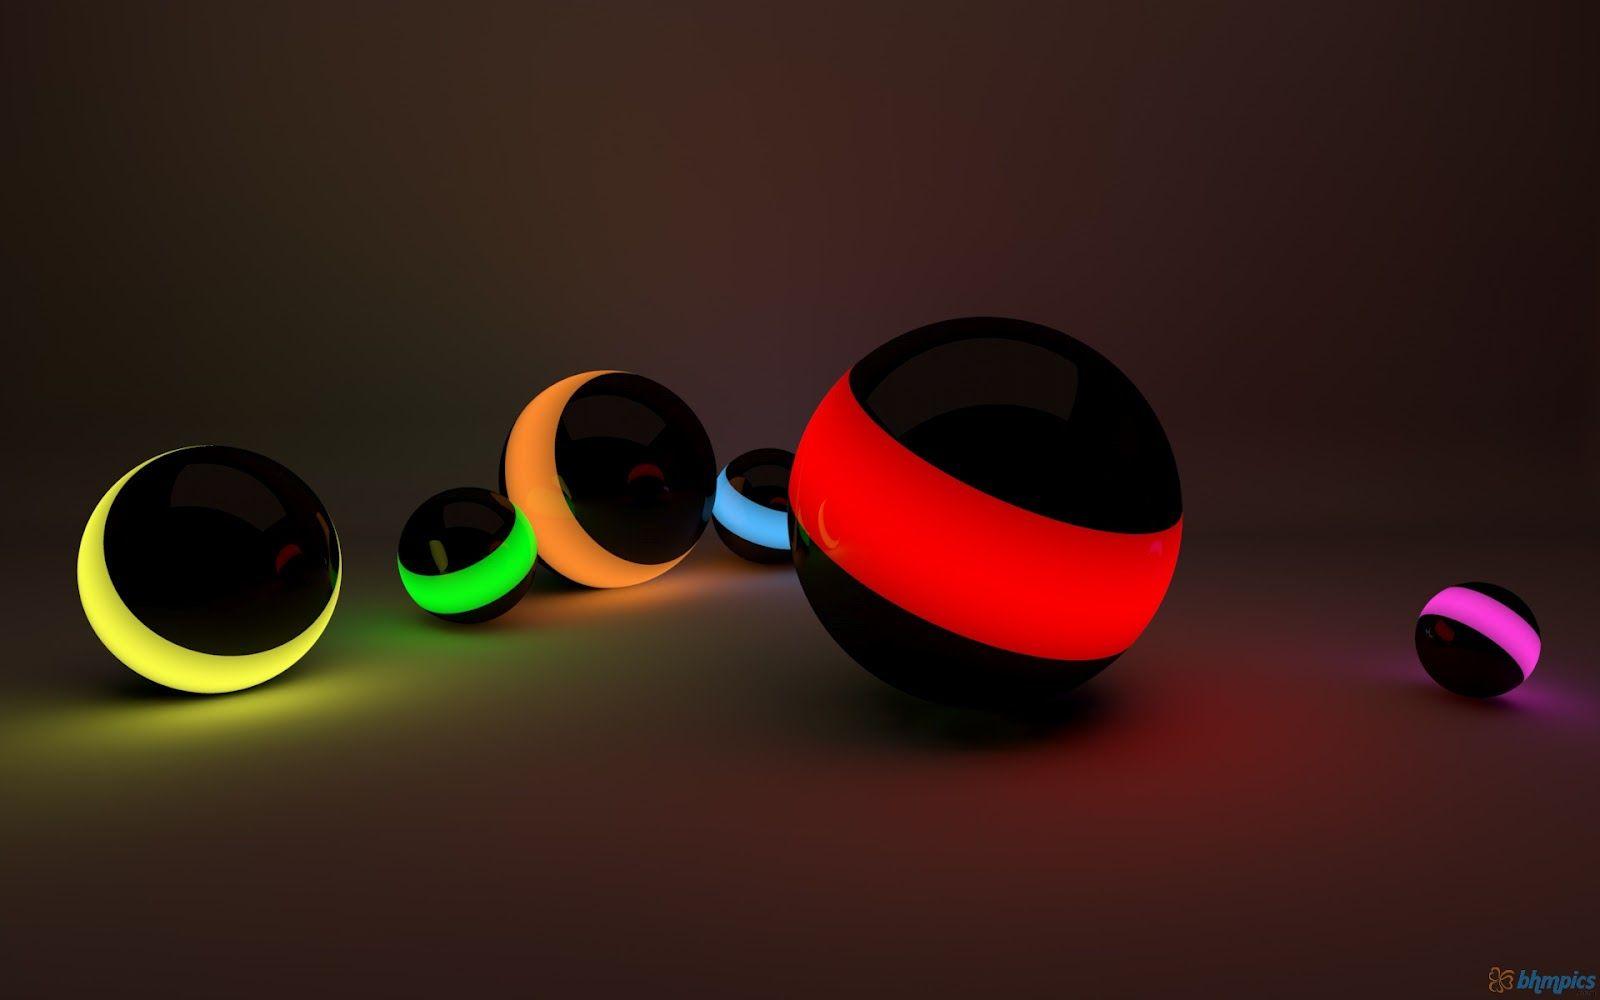 3D Hd Wallpaper Colorful Ball For Laptop Free Download